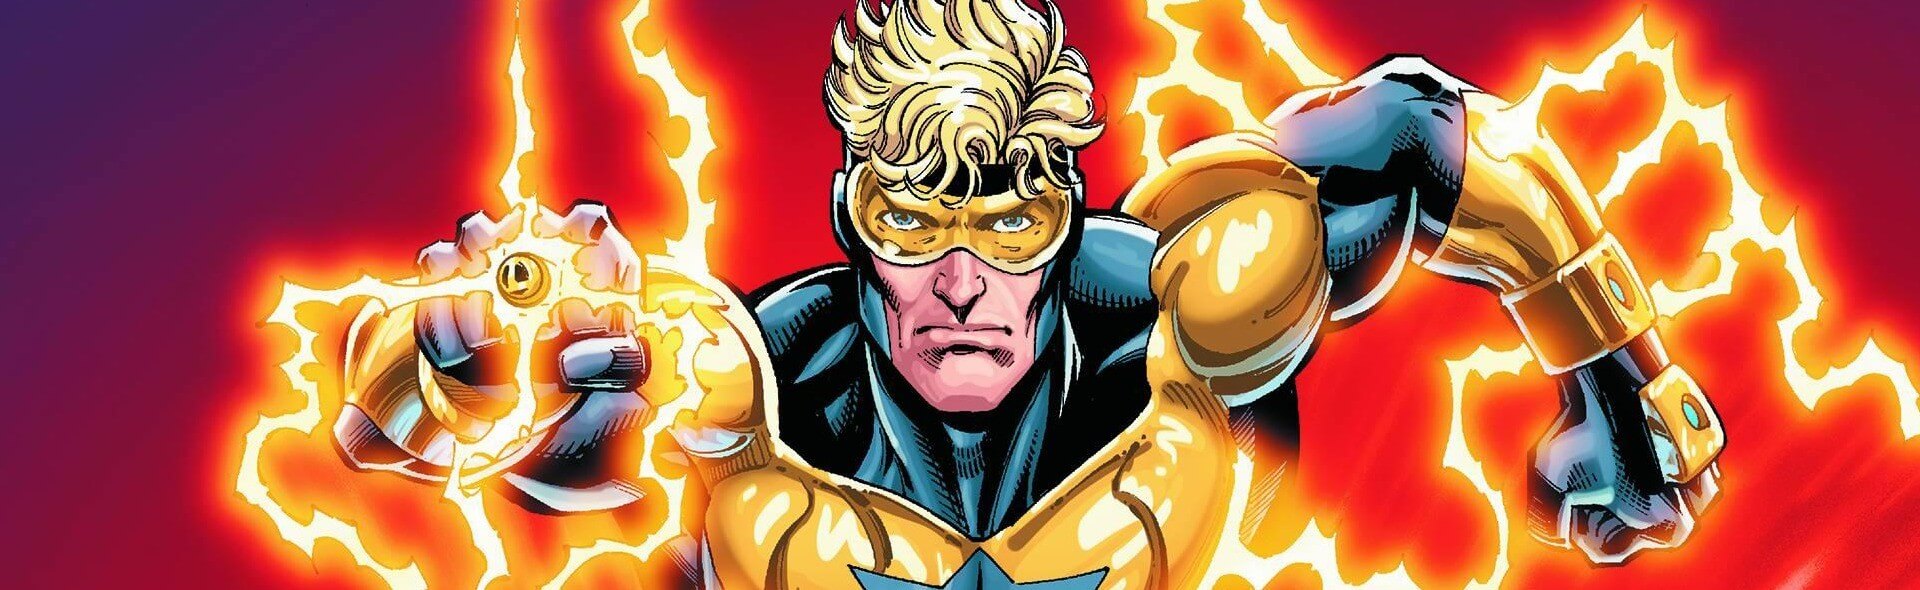 booster-gold-capa